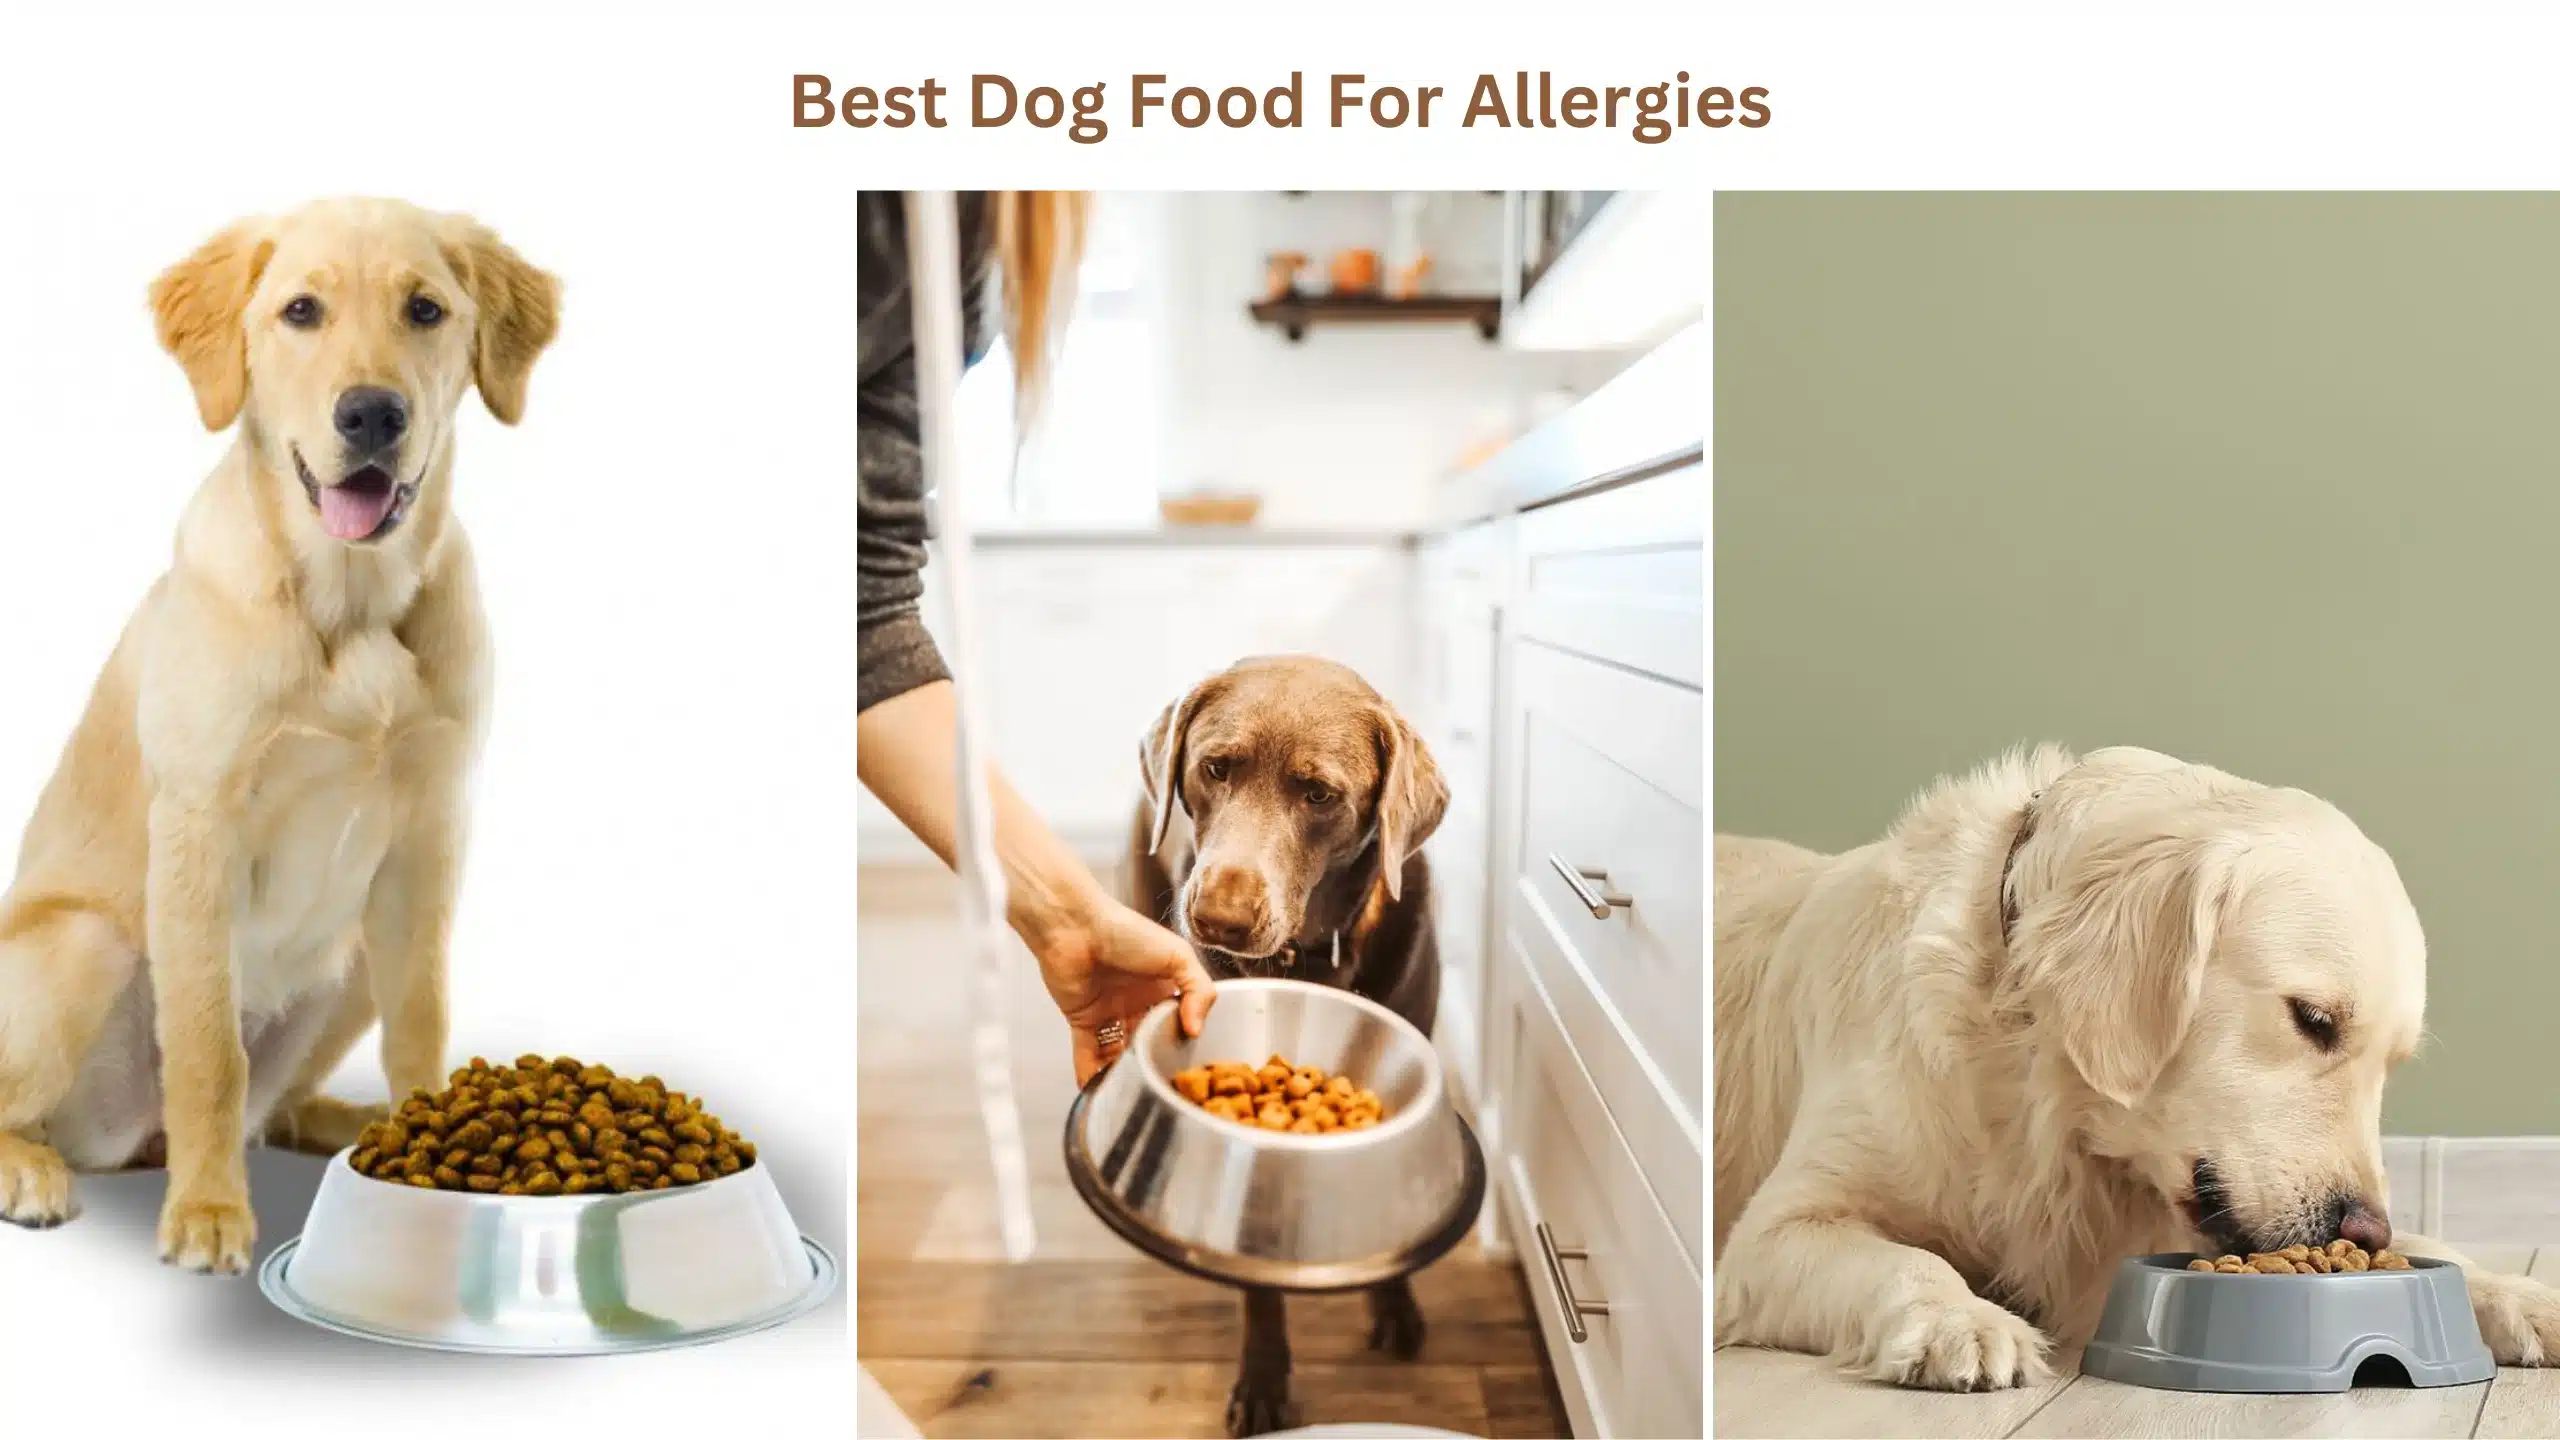 Best dog food for allergies